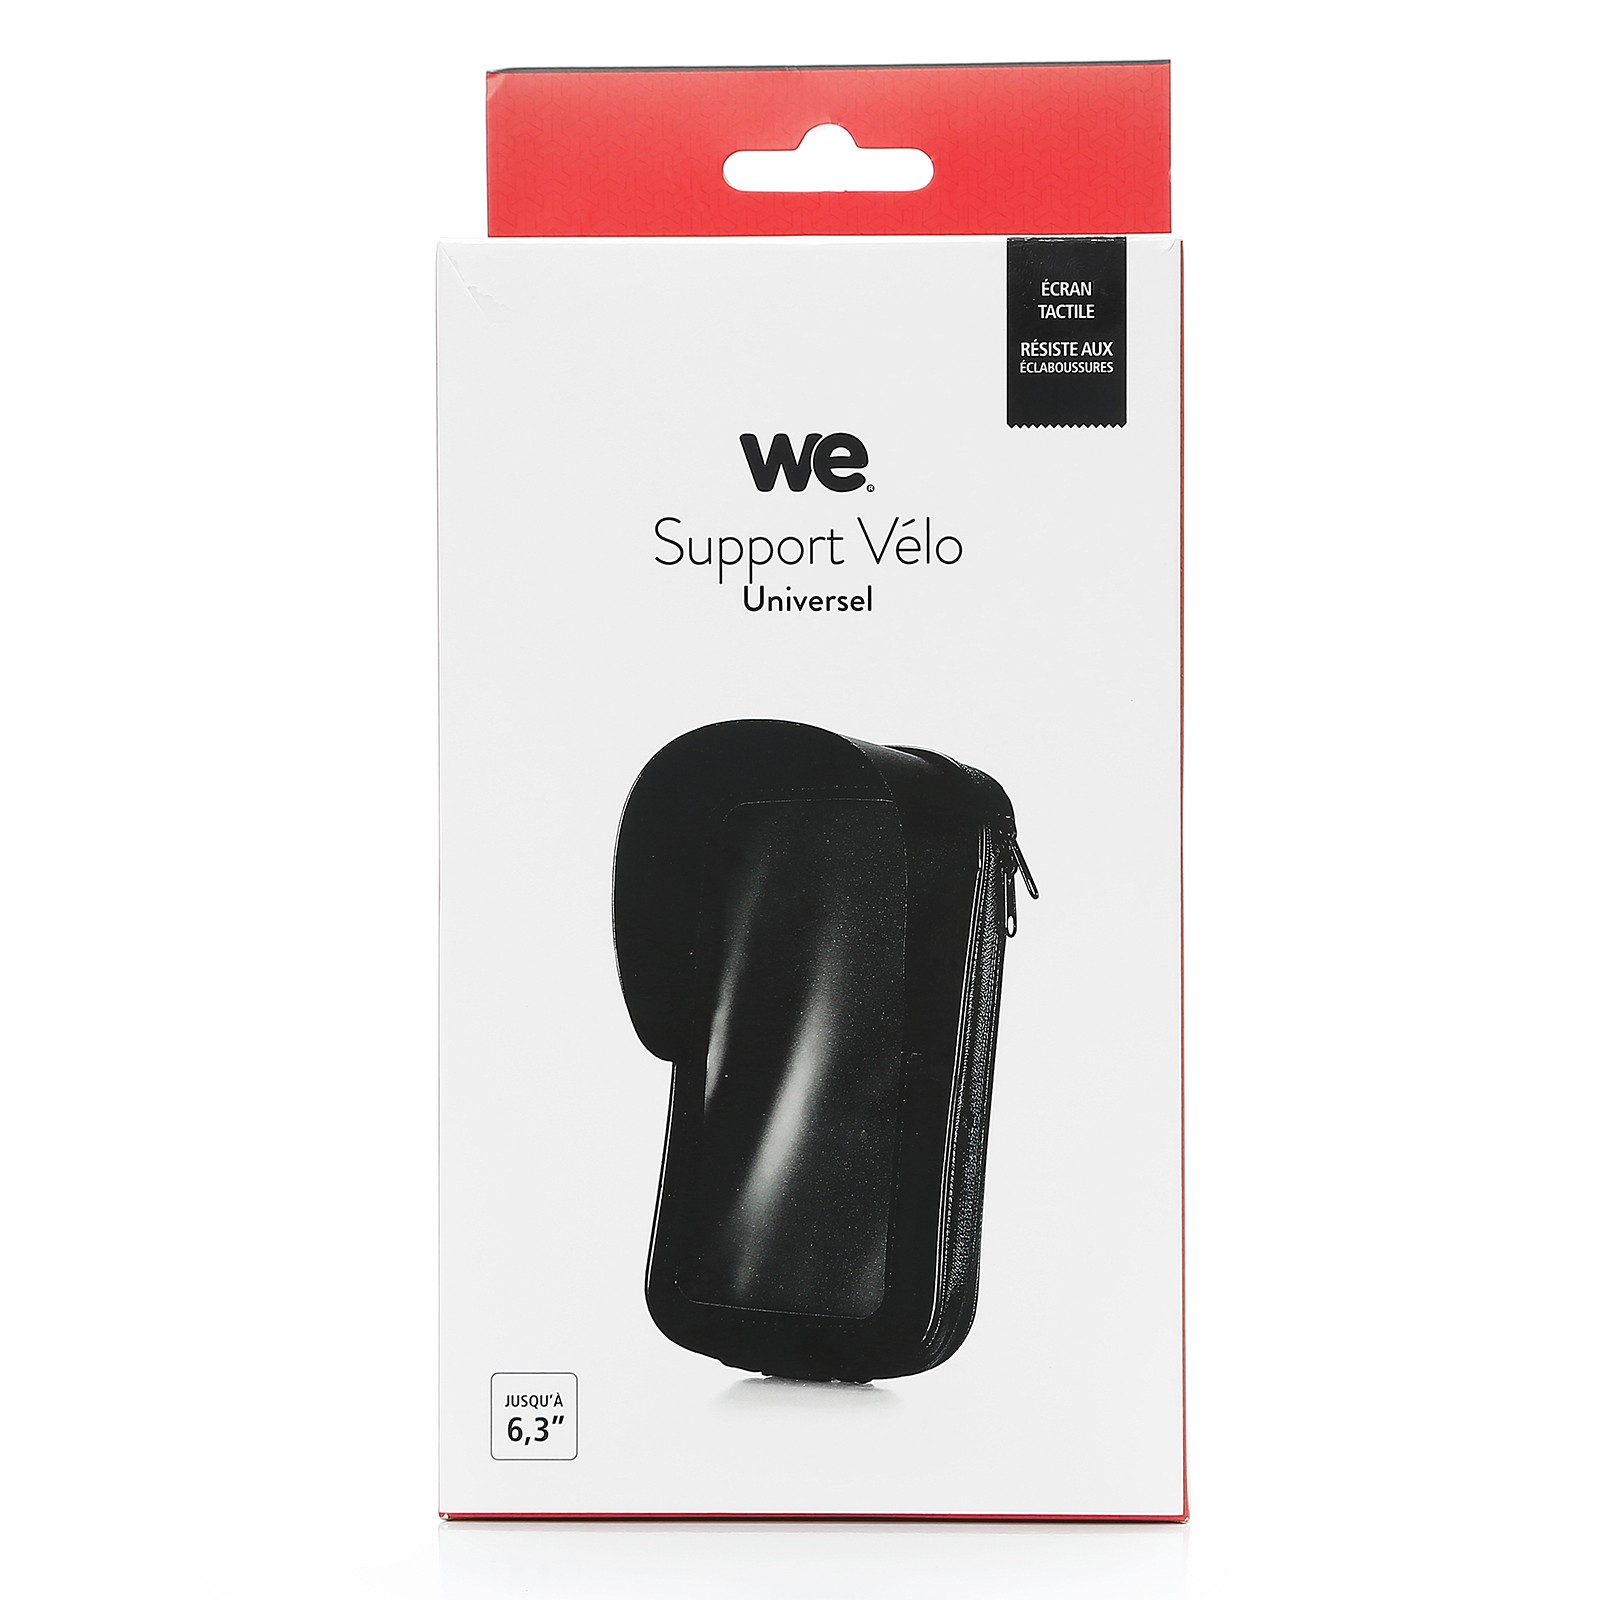 http://www.connect-we.fr/4131/support-velo-telephone-we-support-smartphone-universel-pour-guidon-de-velo-housse-transparente-tactile.jpg